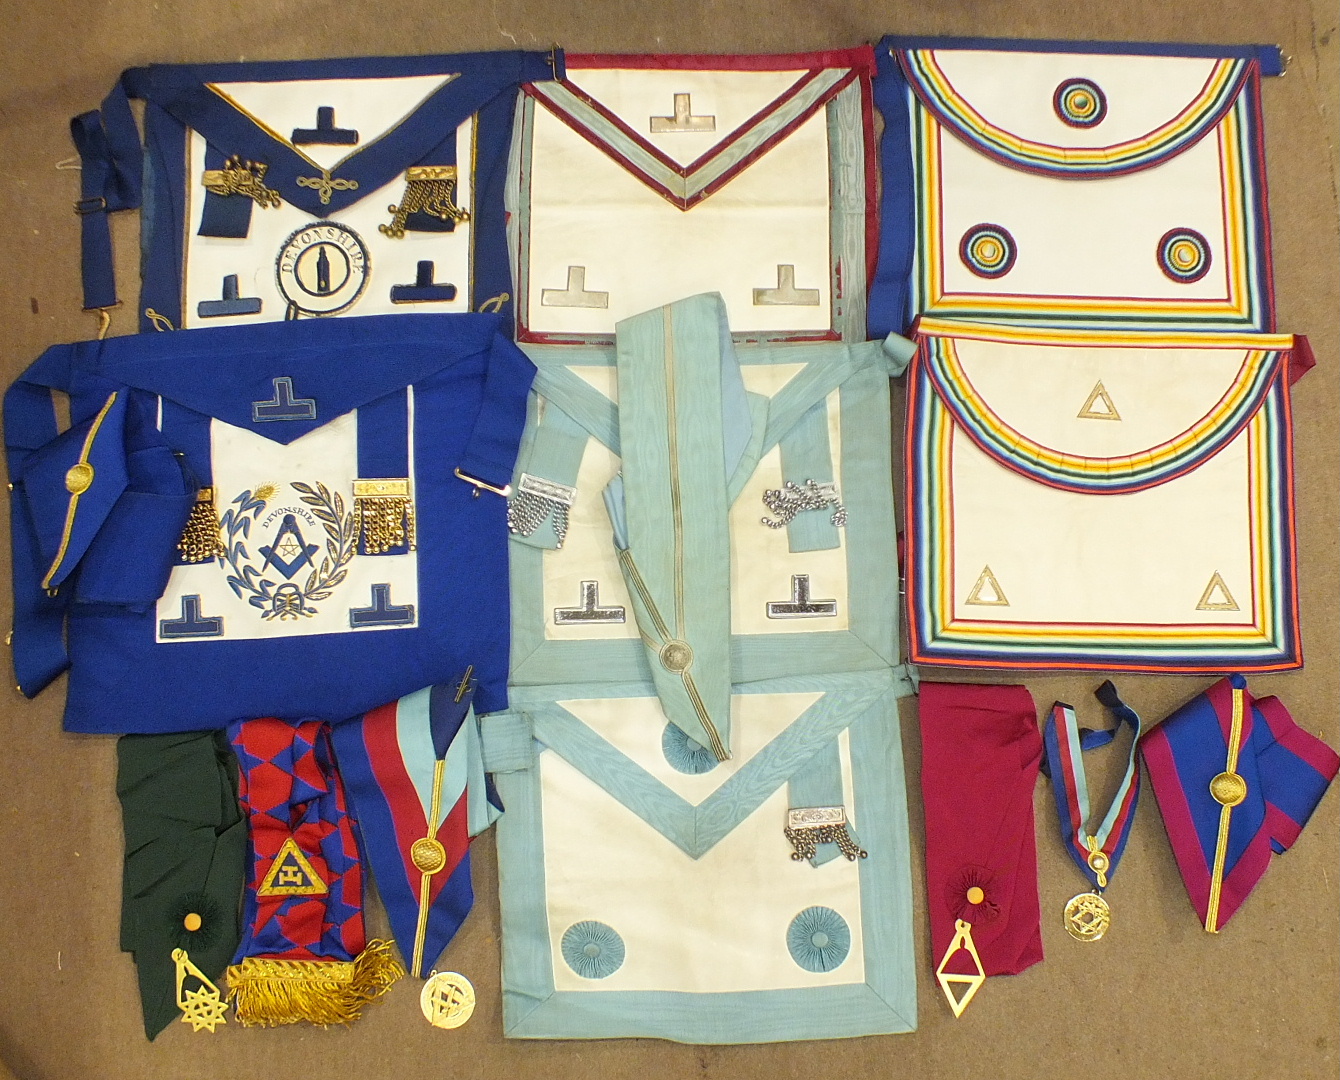 A collection of Craft Masonic regalia including PGM's undress apron, Mark, Ark Mariners and